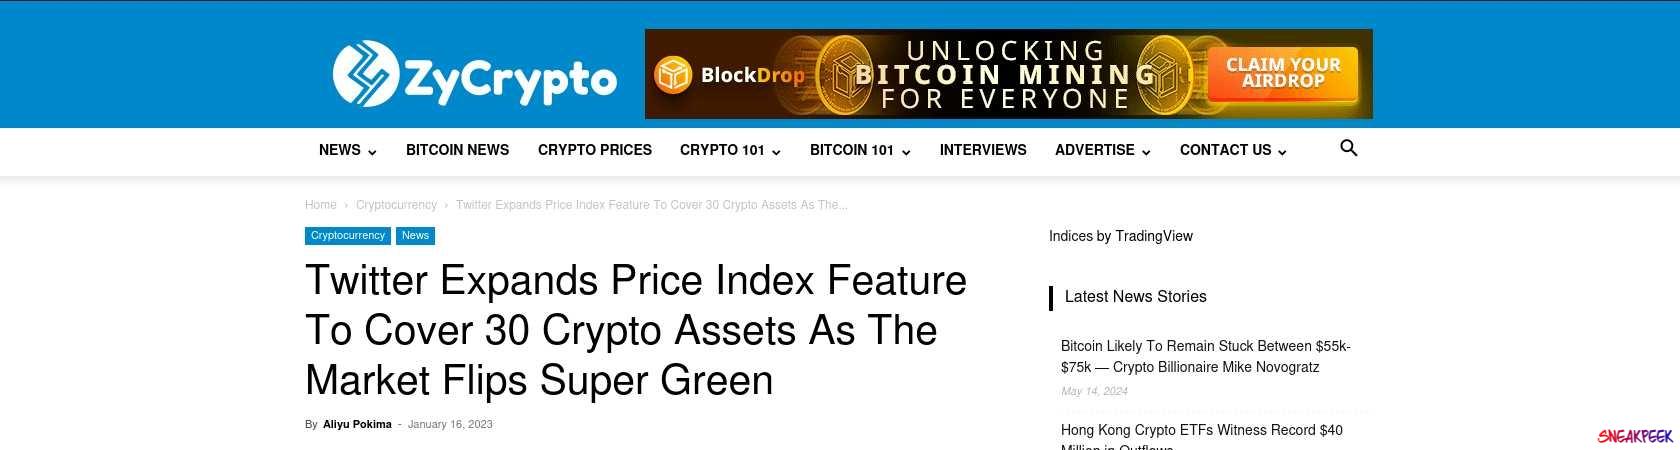 Read the full Article:  ⭲ Twitter Expands Price Index Feature To Cover 30 Crypto Assets As The Market Flips Super Green